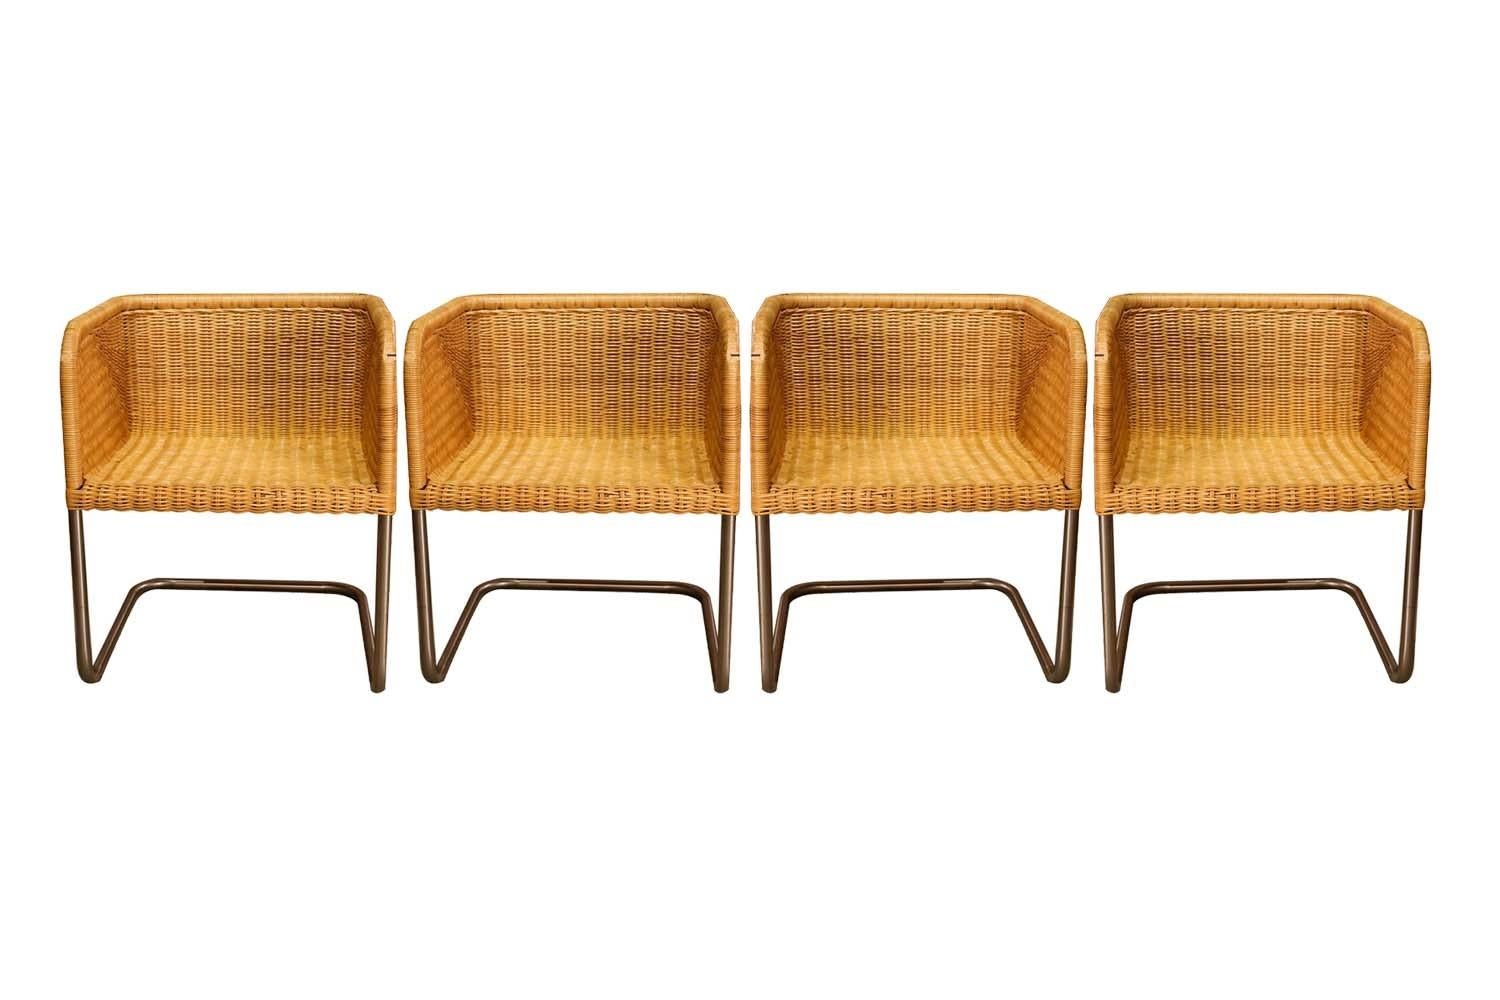 An amazing set of 4 vintage model D43 wicker and chrome cantilever chairs designed by Preban Fabricius & Jorgen Kastholm for Harvey Probber in Denmark. A rare set of Probber chairs featuring cube shaped frames with a woven wicker seat, back and